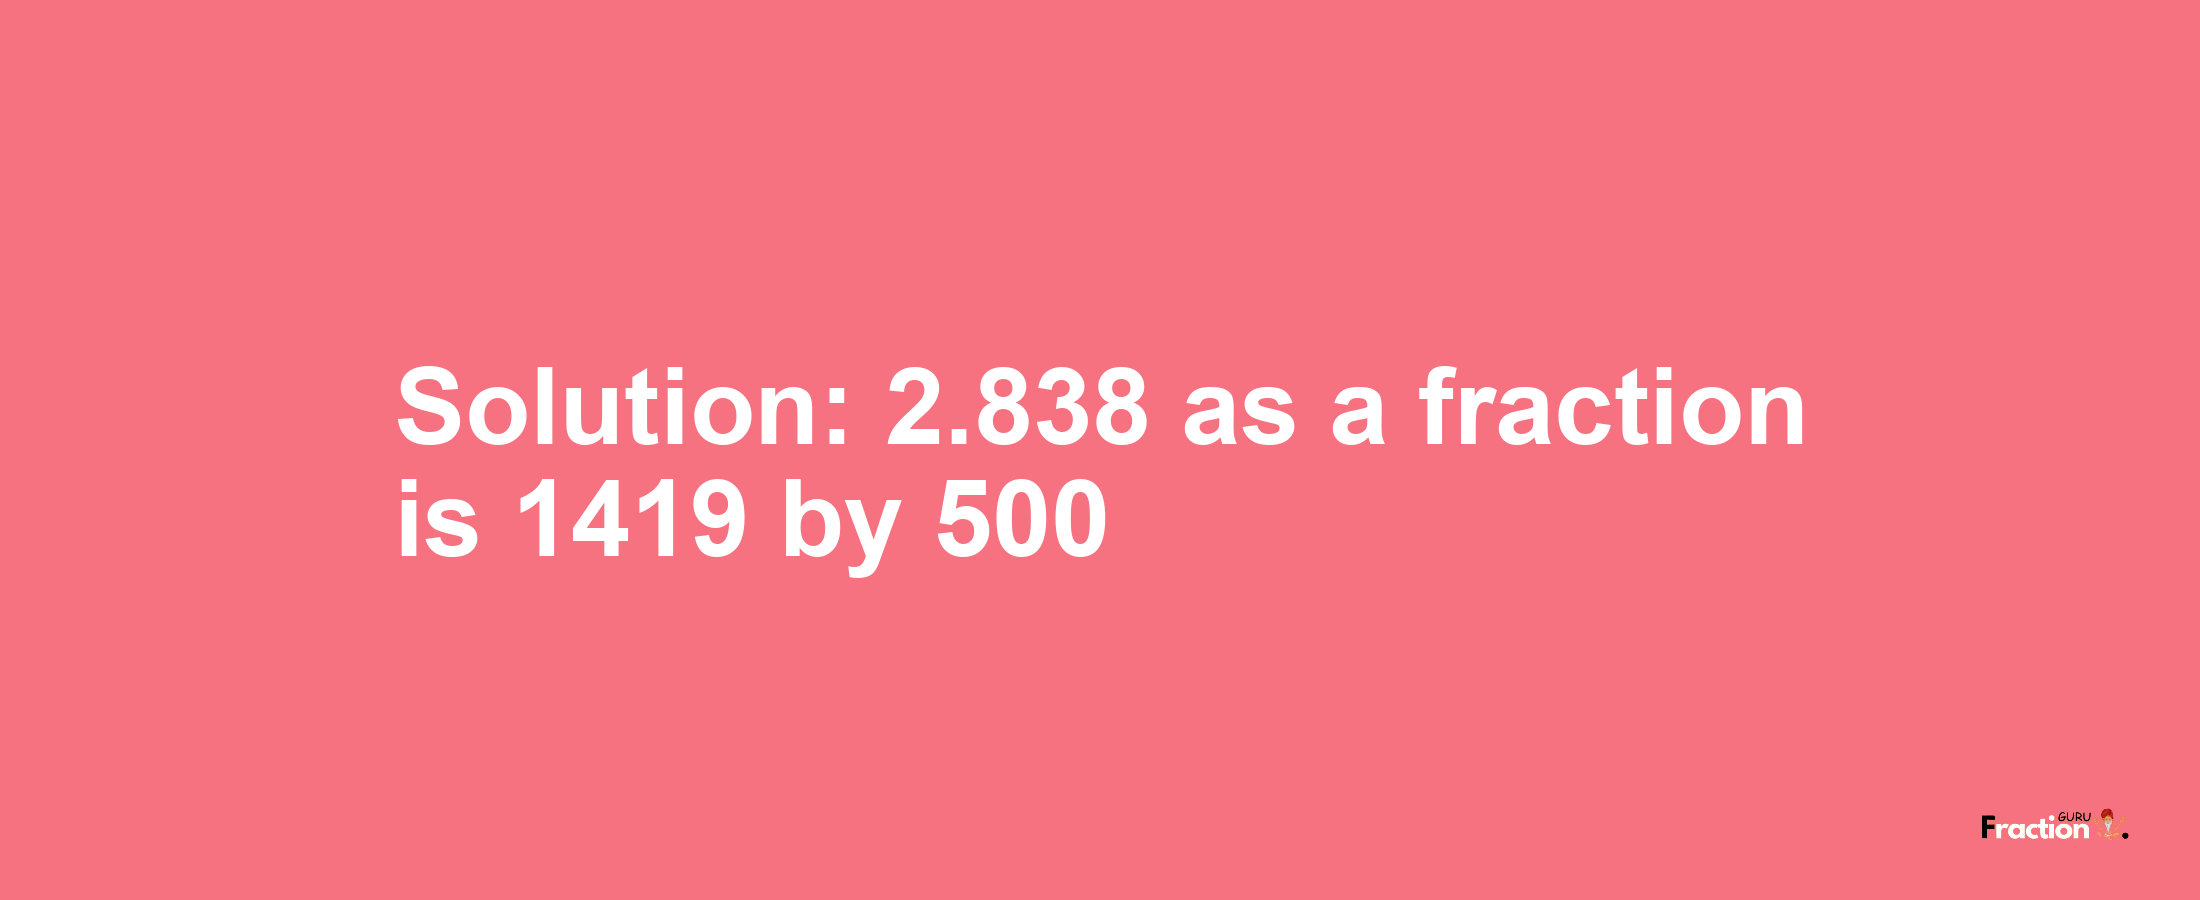 Solution:2.838 as a fraction is 1419/500